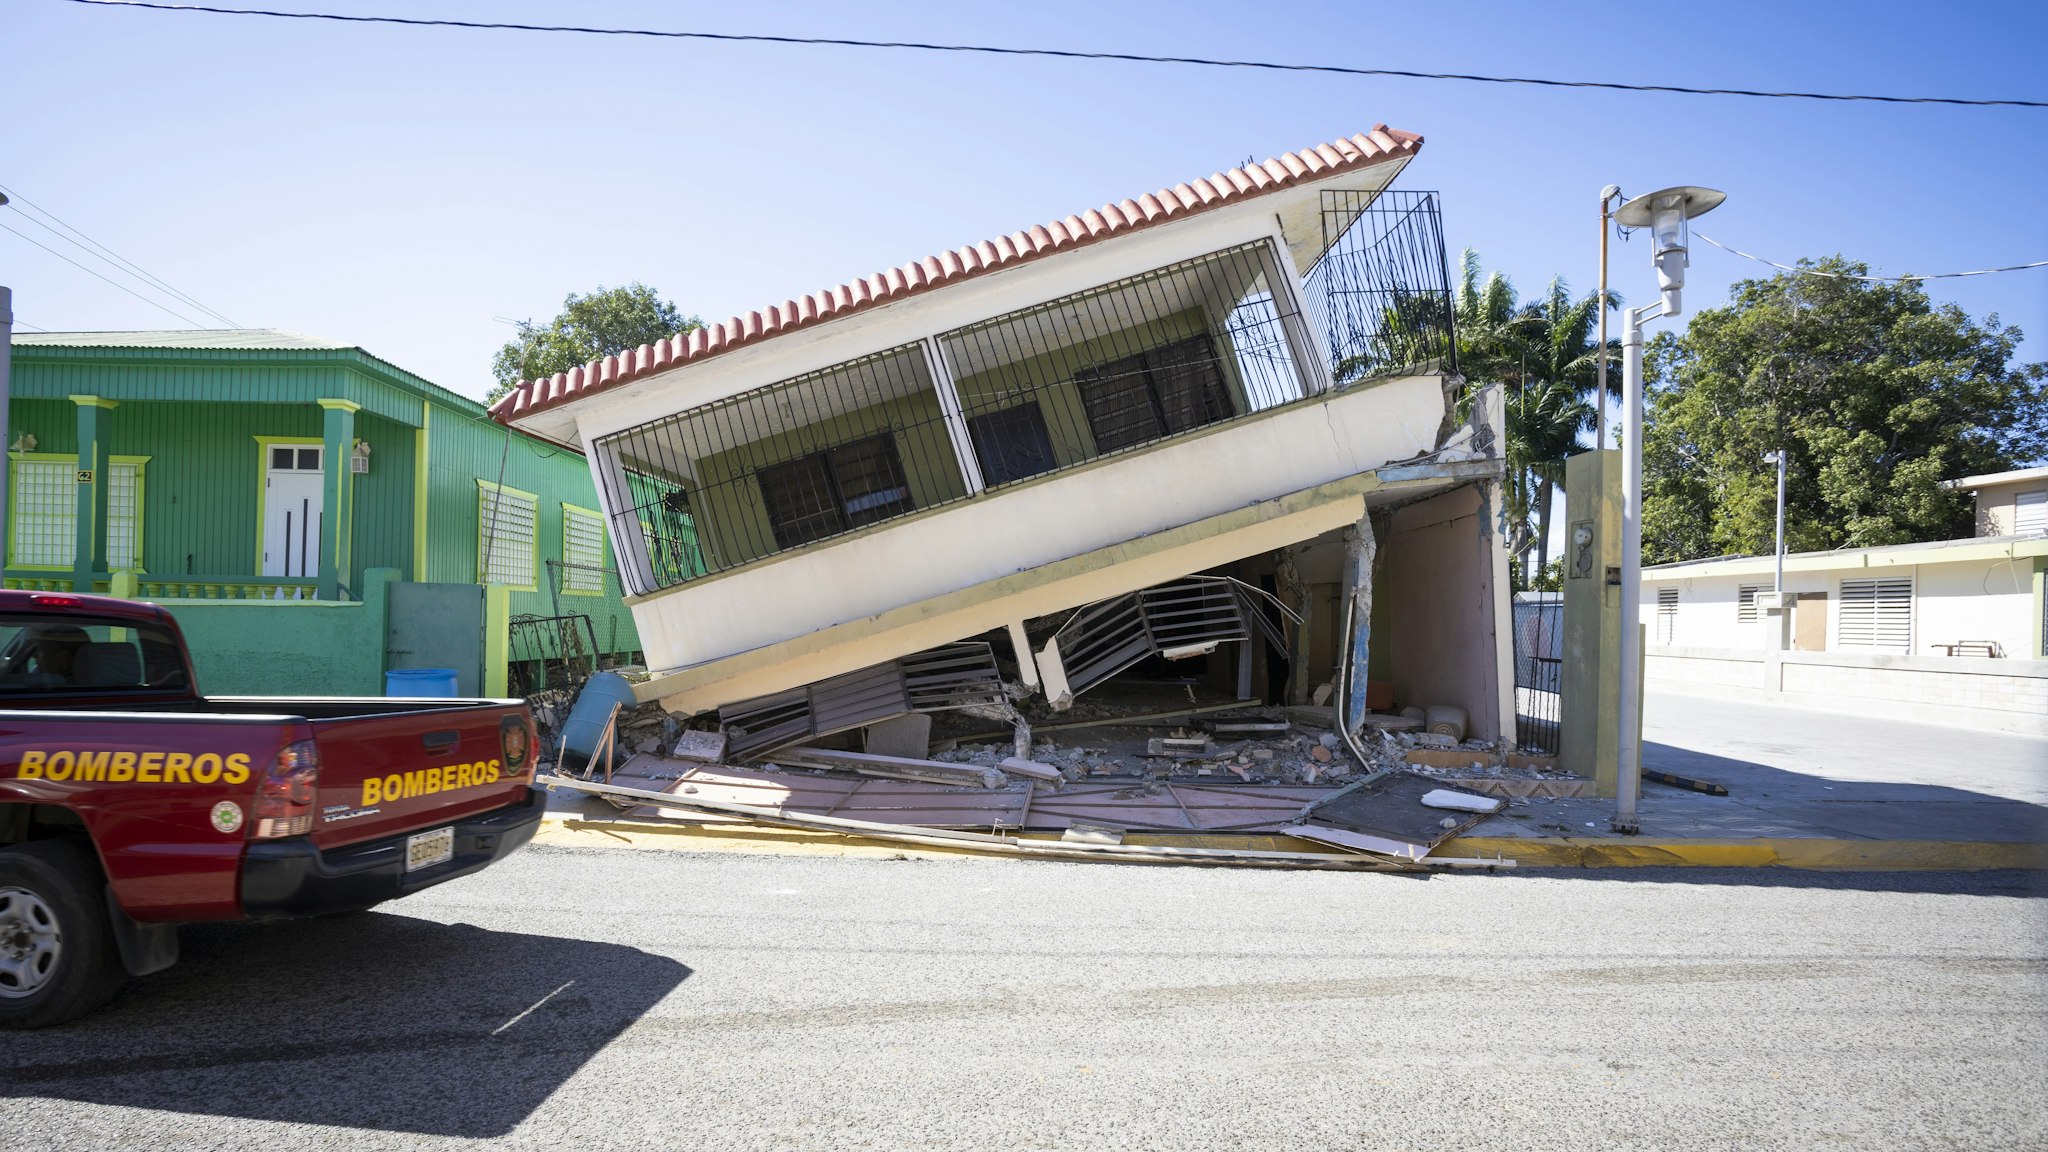 GUANICA, PUERTO RICO - JANUARY 7: A view of damages at Guanica town after 6.4-magnitude earthquake hit Puerto Rico on January 7, 2020. (Photo by Alejandro Granadillo/Anadolu Agency via Getty Images)